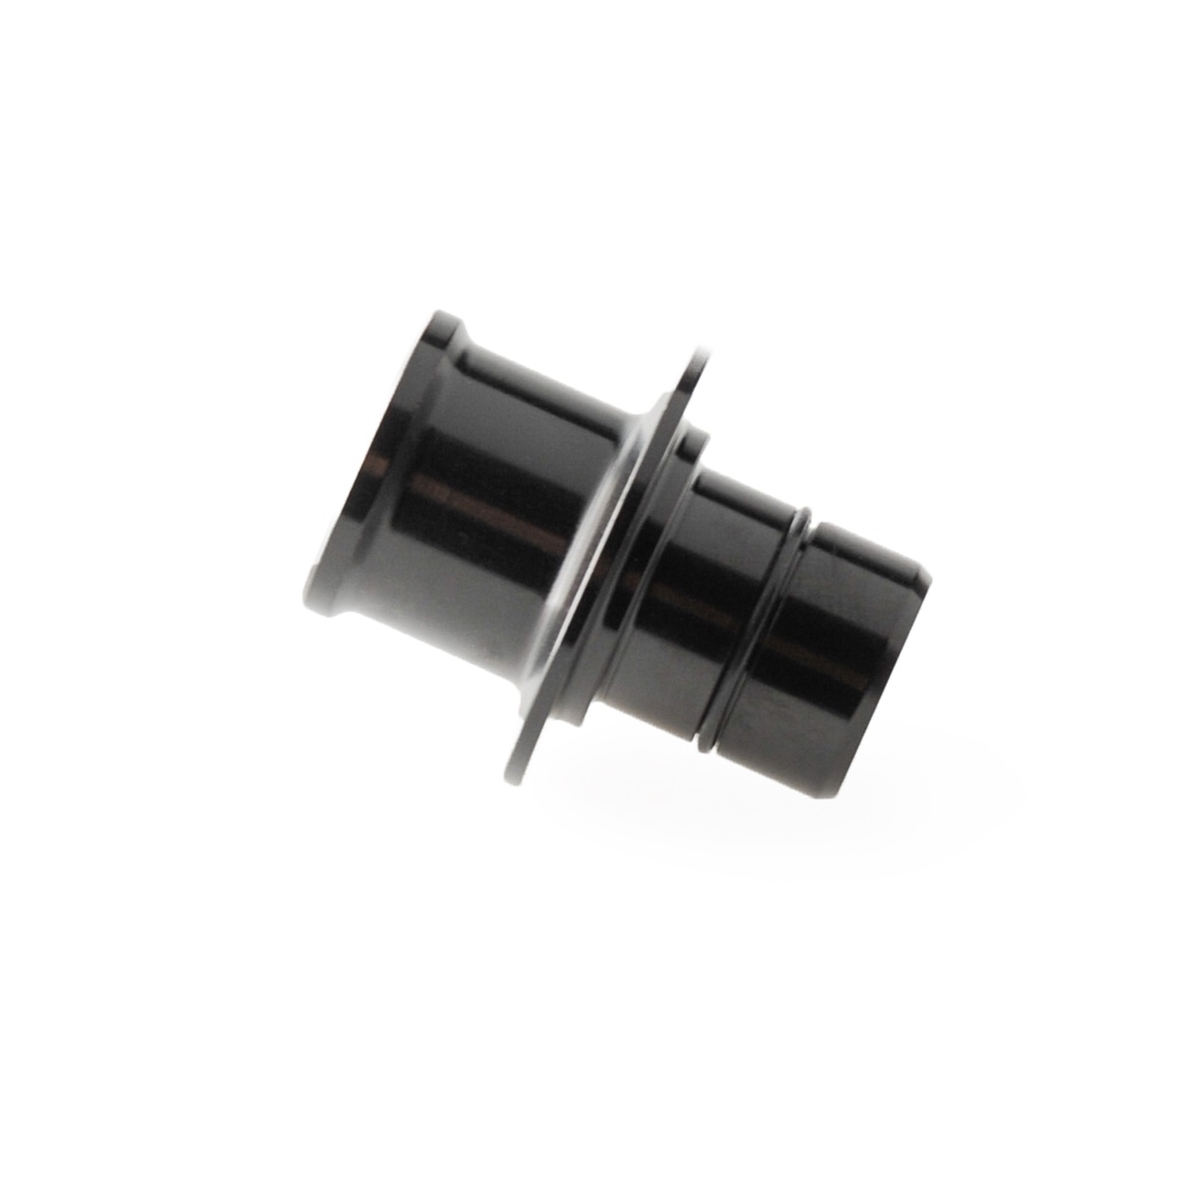 Front Hub Adapter left side 12x100mm pin for 350 - 370 hubs